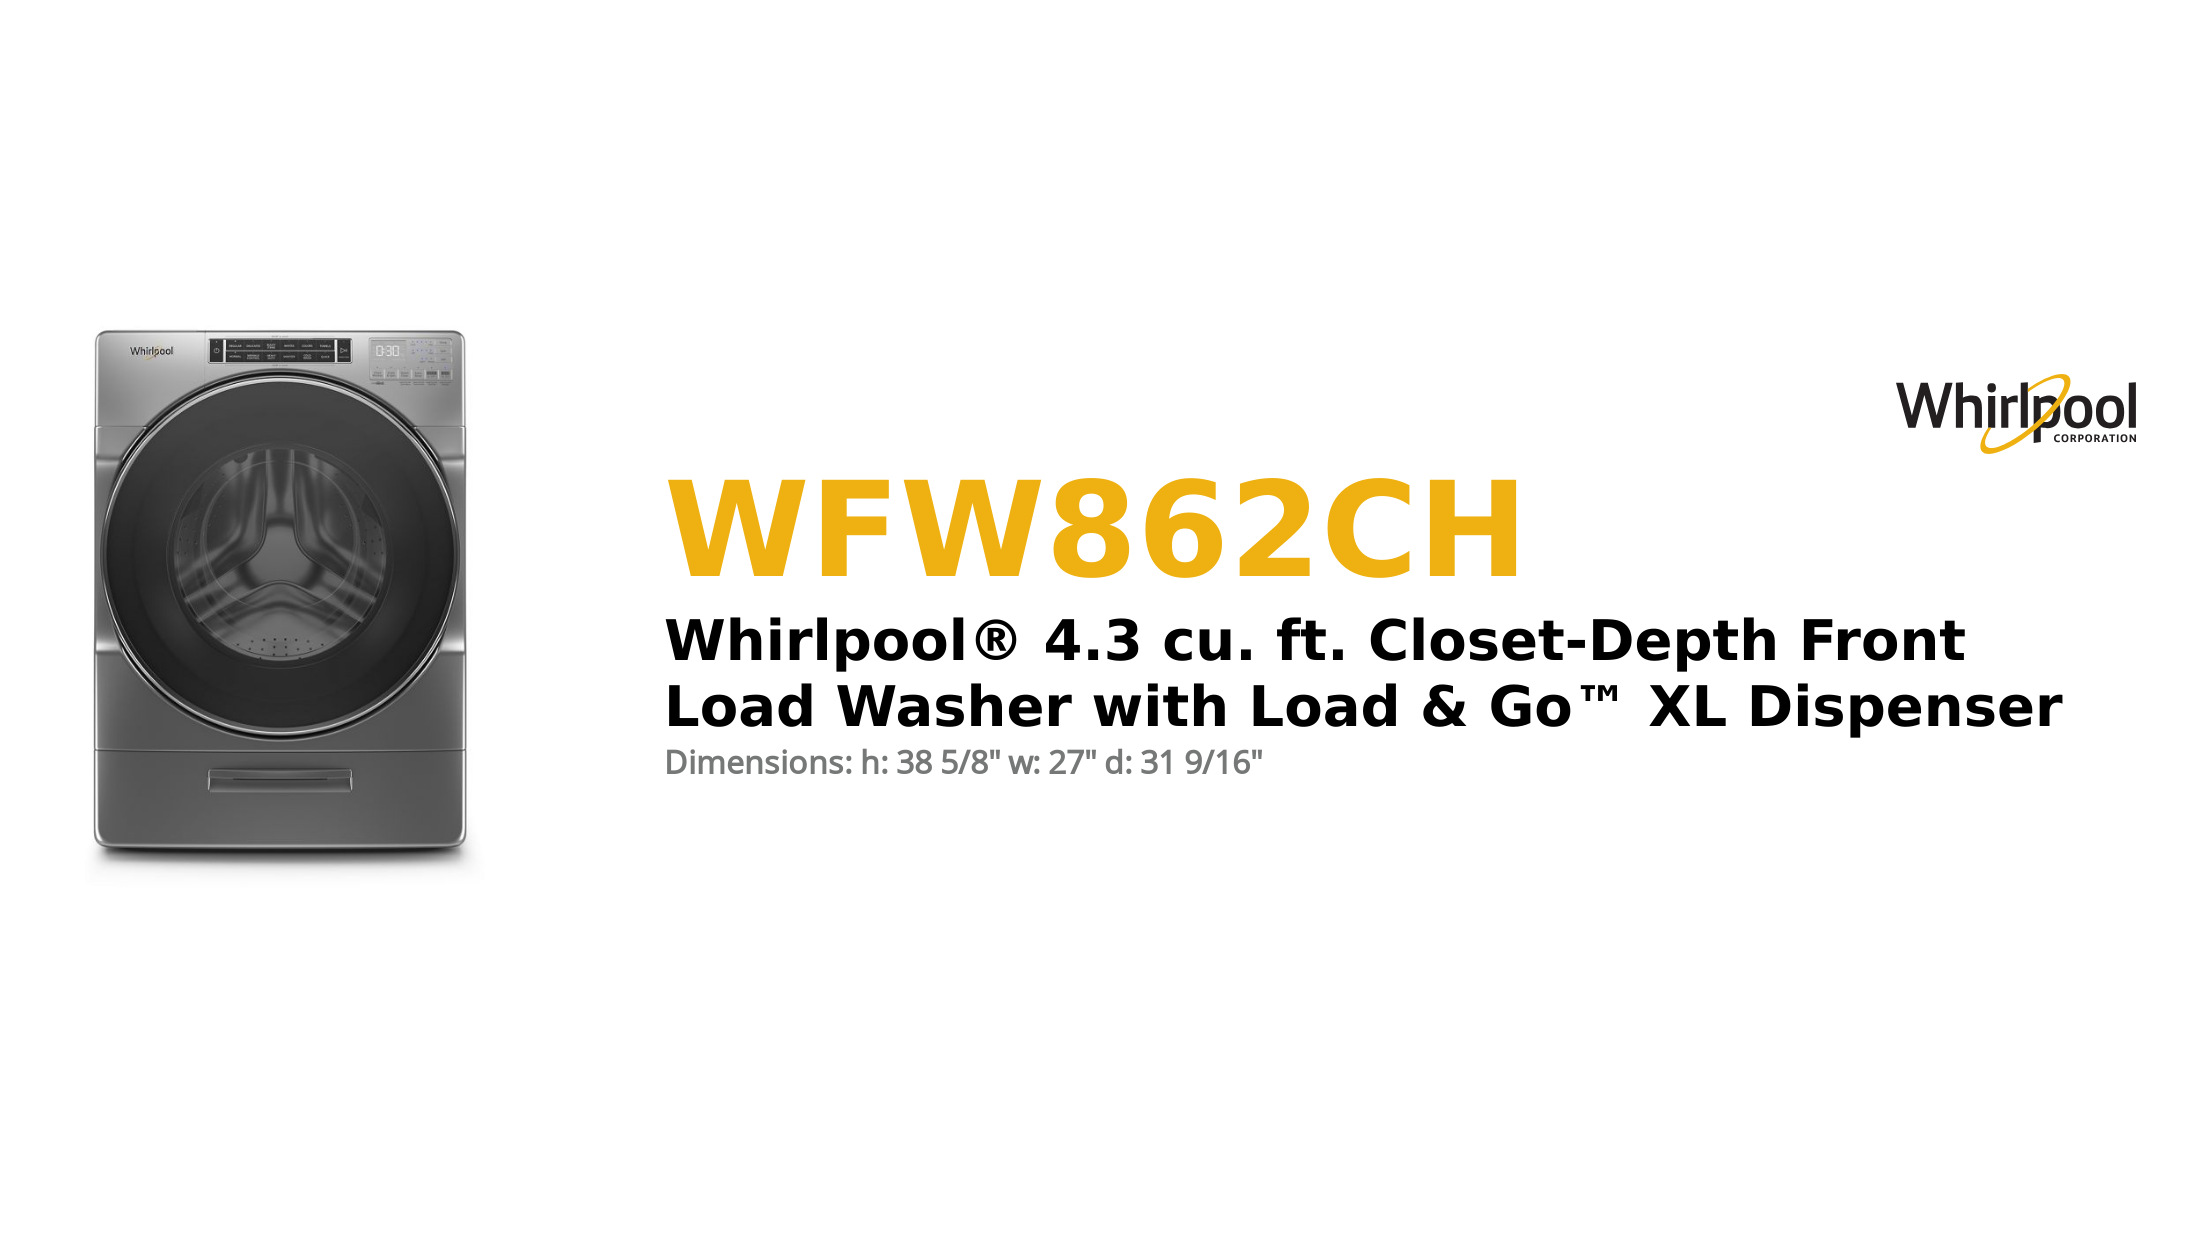 Whirlpool® 4.3 cu. ft. Closet-Depth Front Load Washer with Load & Go™ XL Dispenser